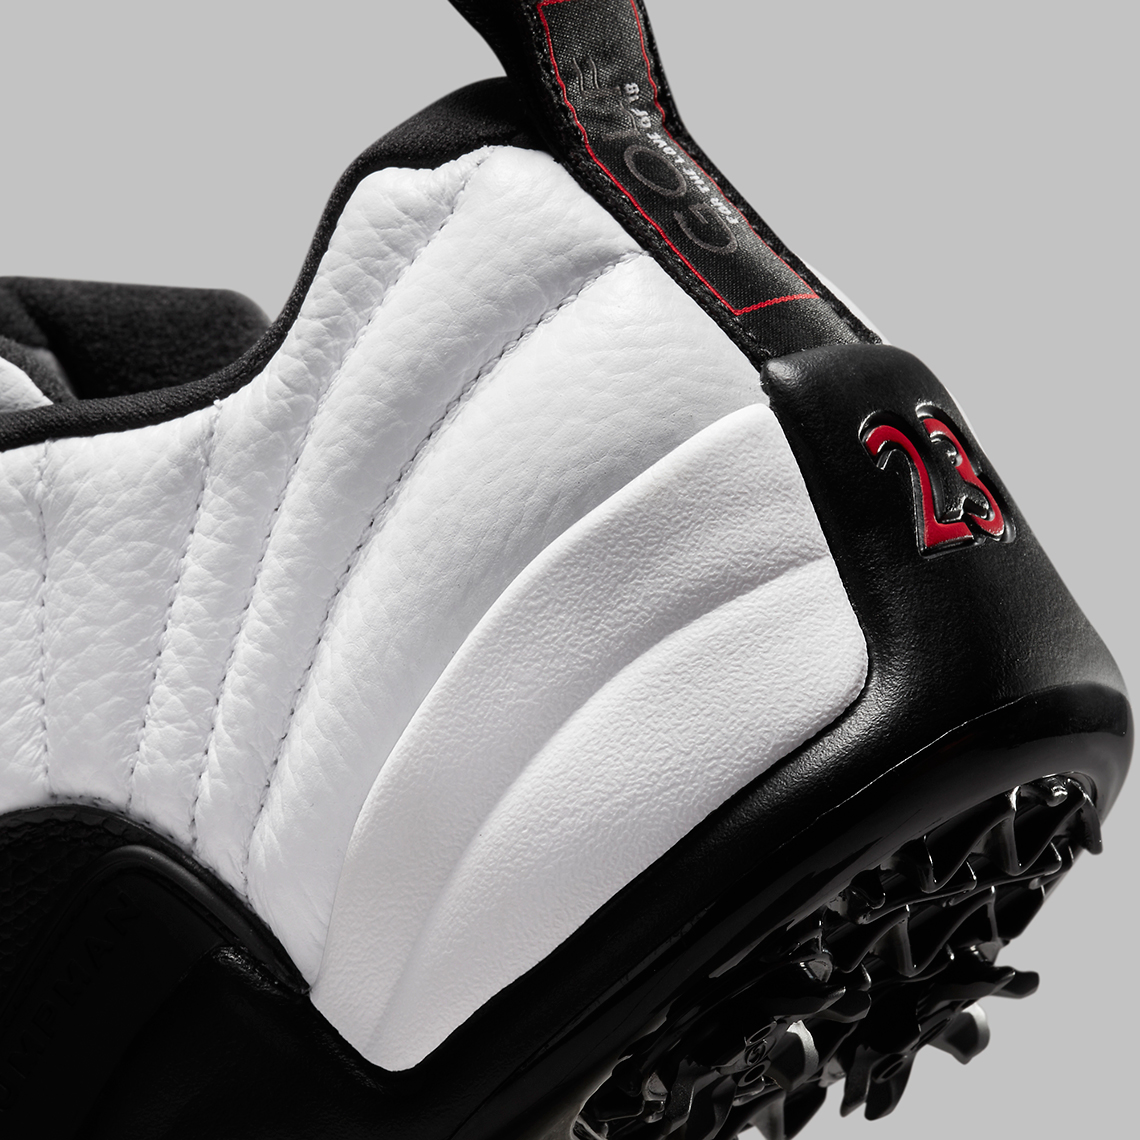 Air and Jordan Retro XIII 'Playoff' New Images Golf Taxi Official Images 3